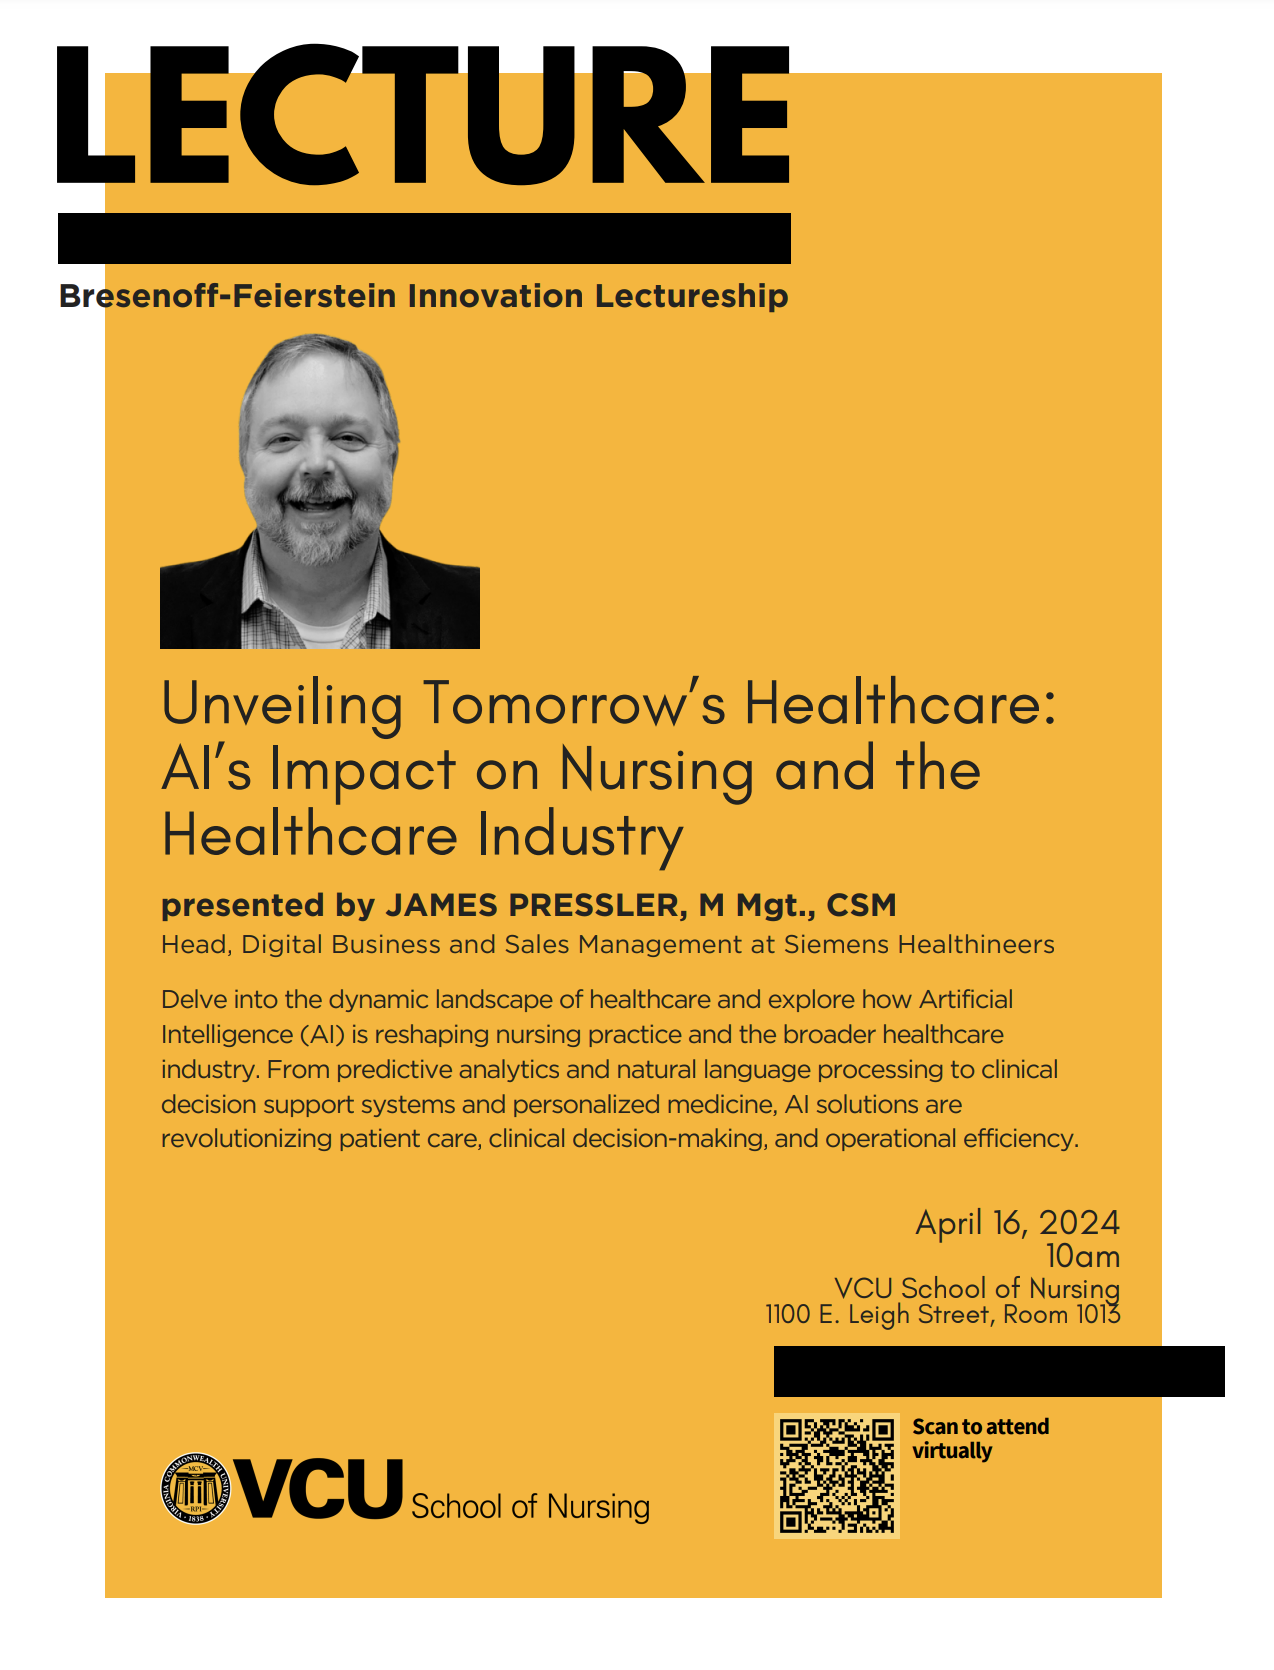 AI impact on Nursing and the Healthcare Industry